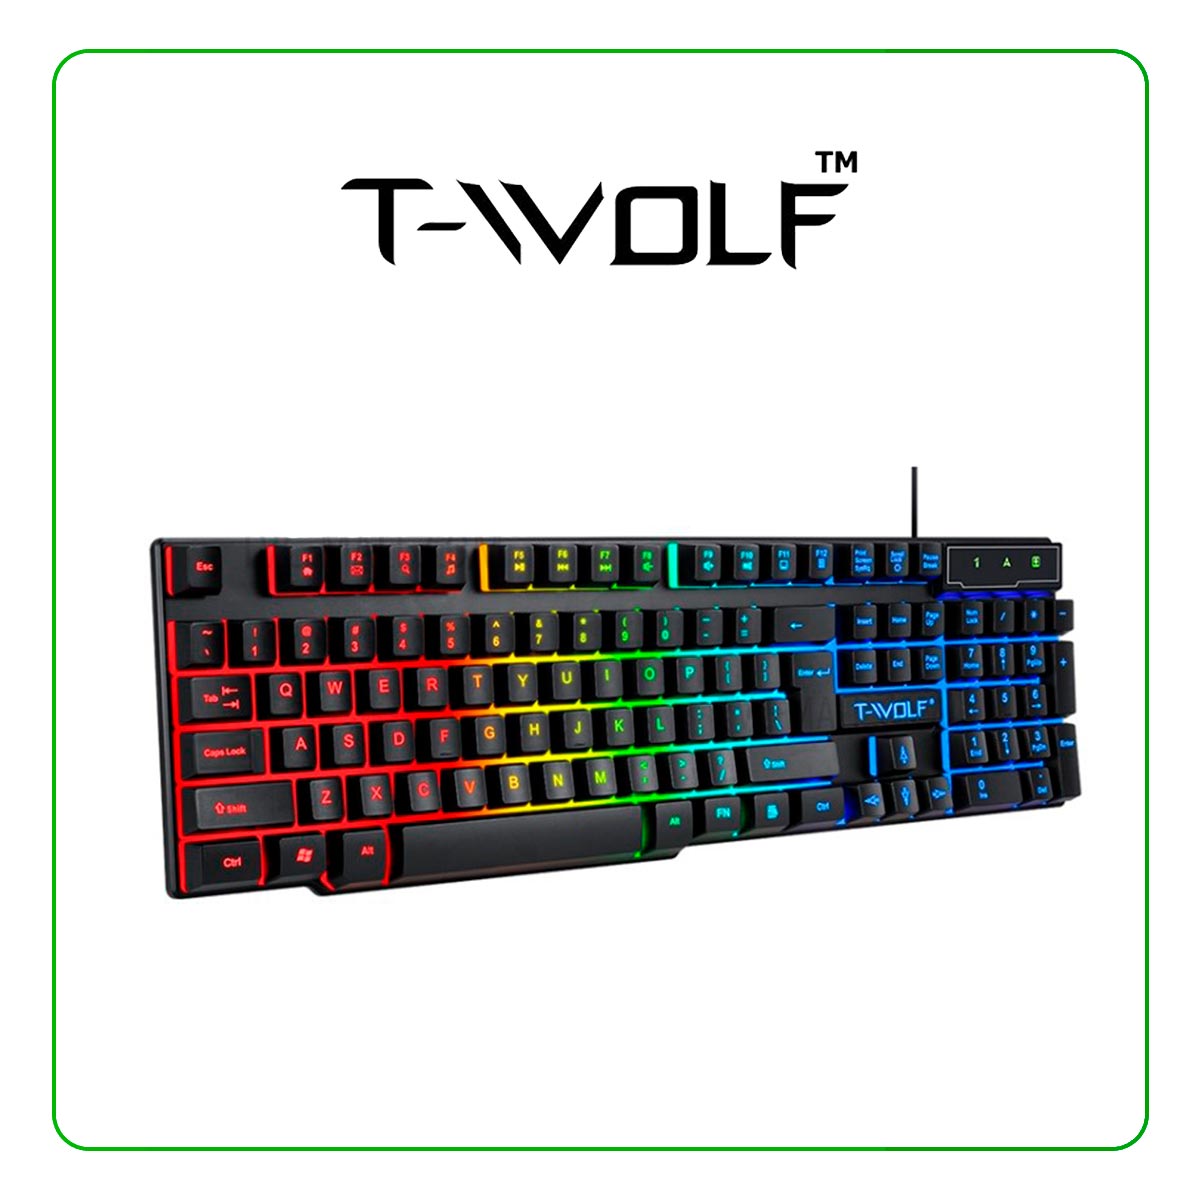 KIT T-WOLF GAMING COMBO TF800 4 EN 1 AUDIFONO + MOUSE PAD + KEYBOARD + MOUSE GAMING SET (S002865)